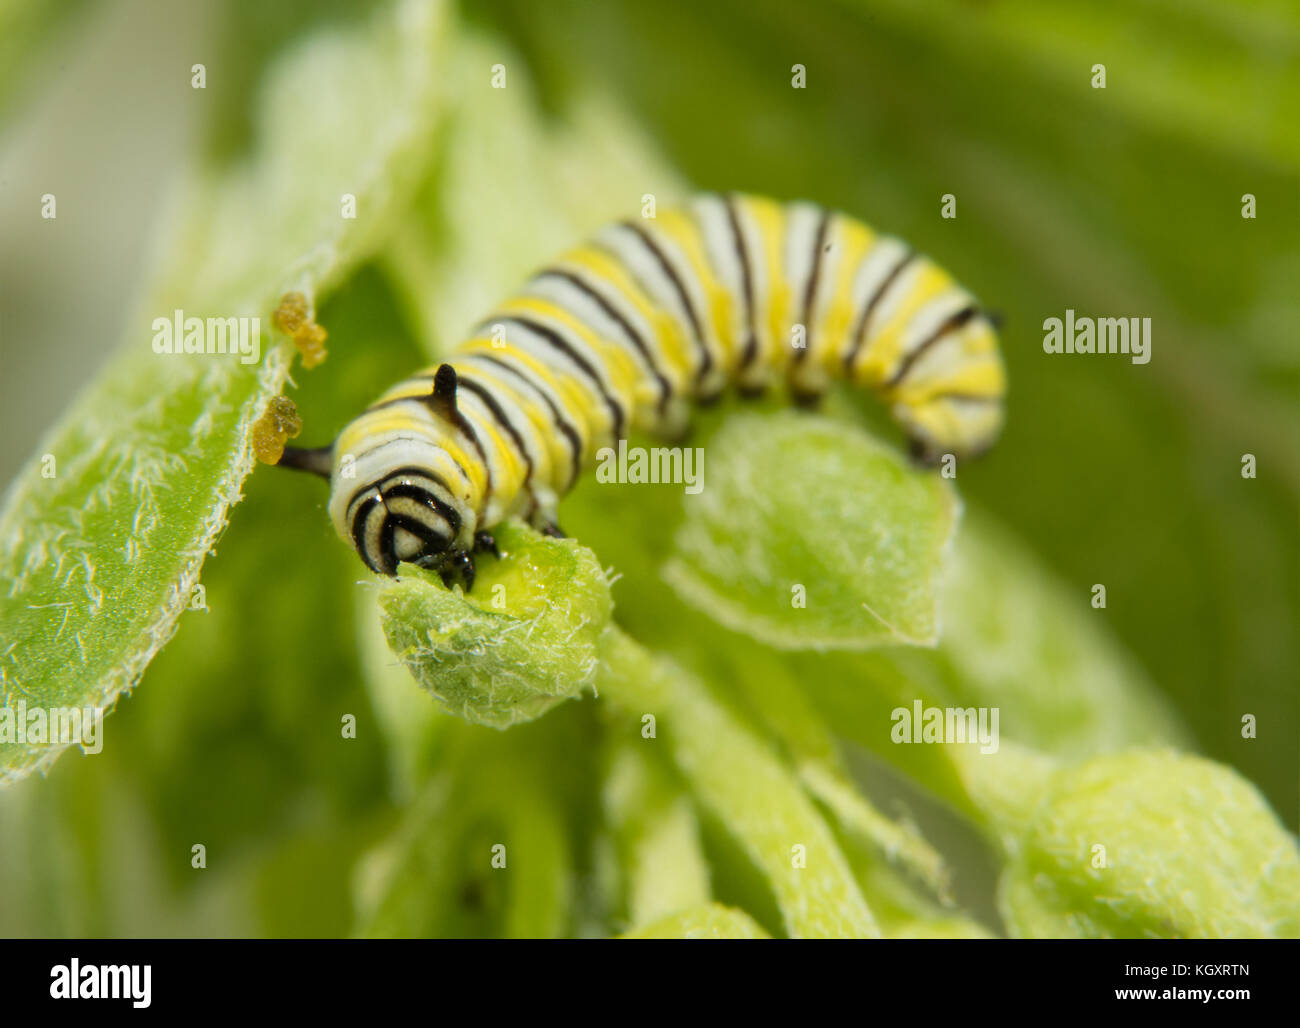 Very small second instar Monarch butterfly caterpillar eating on a Milkweed bud Stock Photo